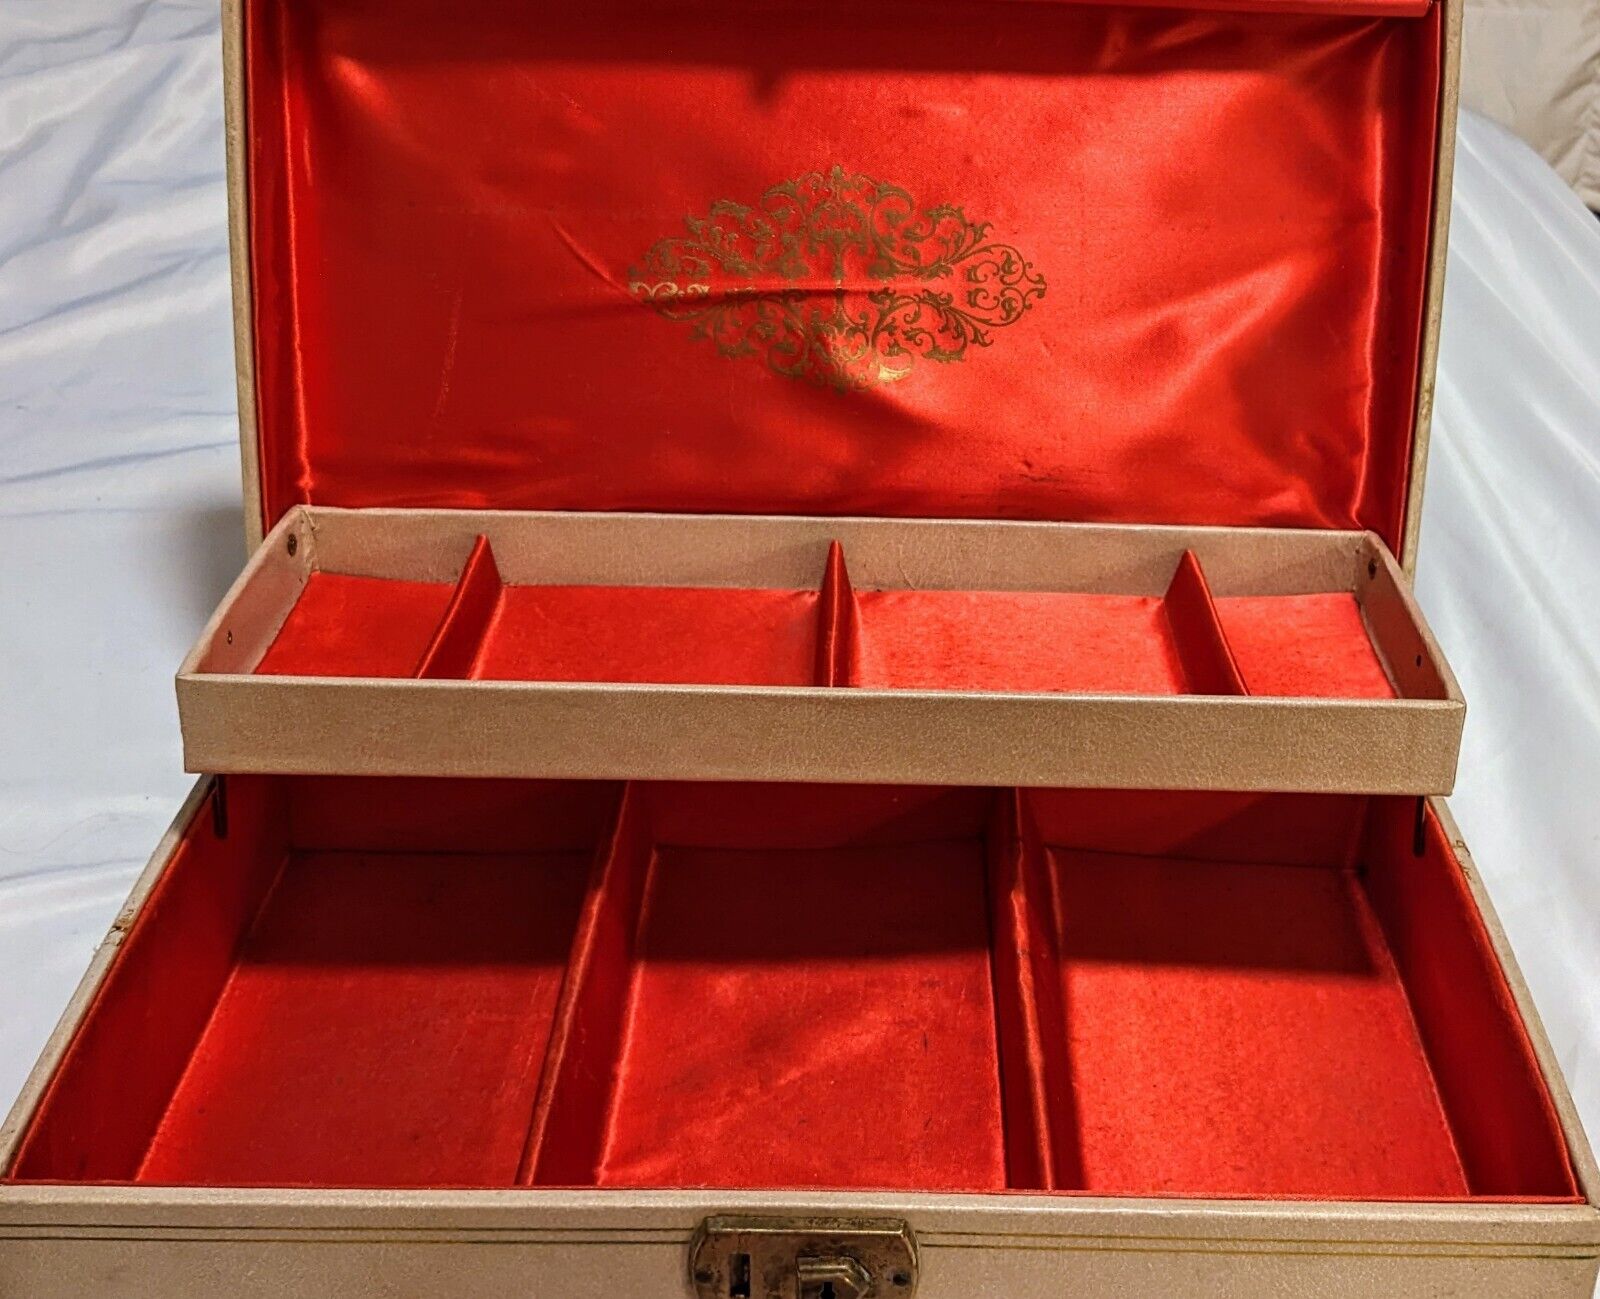 Vintage 1960's Mele Jewelry Box  2 Tier Off-White Red Satin Interior